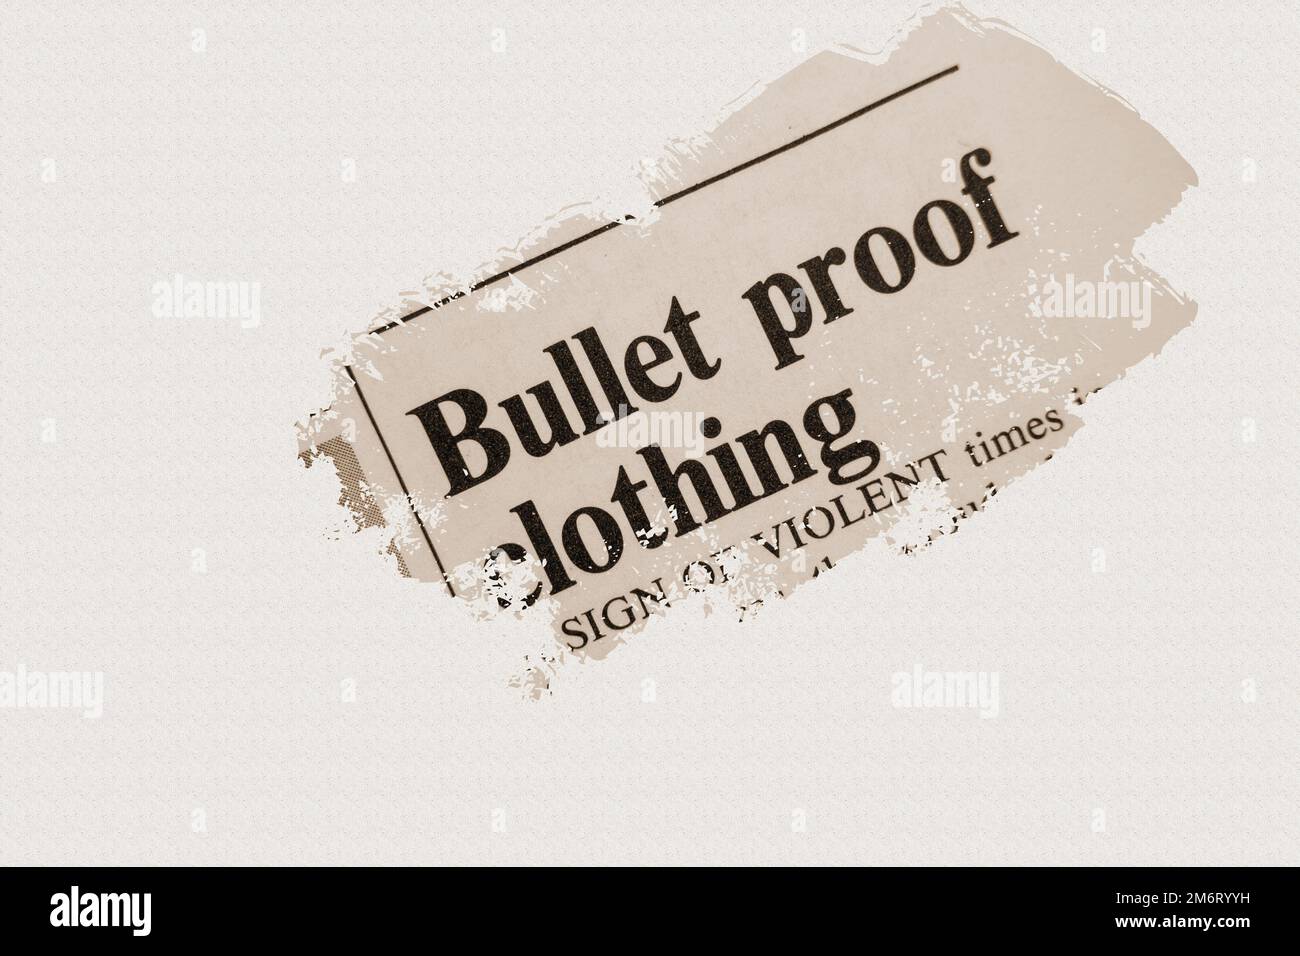 news story from 1975 newspaper headline article title - Bullet proof clothing - sepia Stock Photo